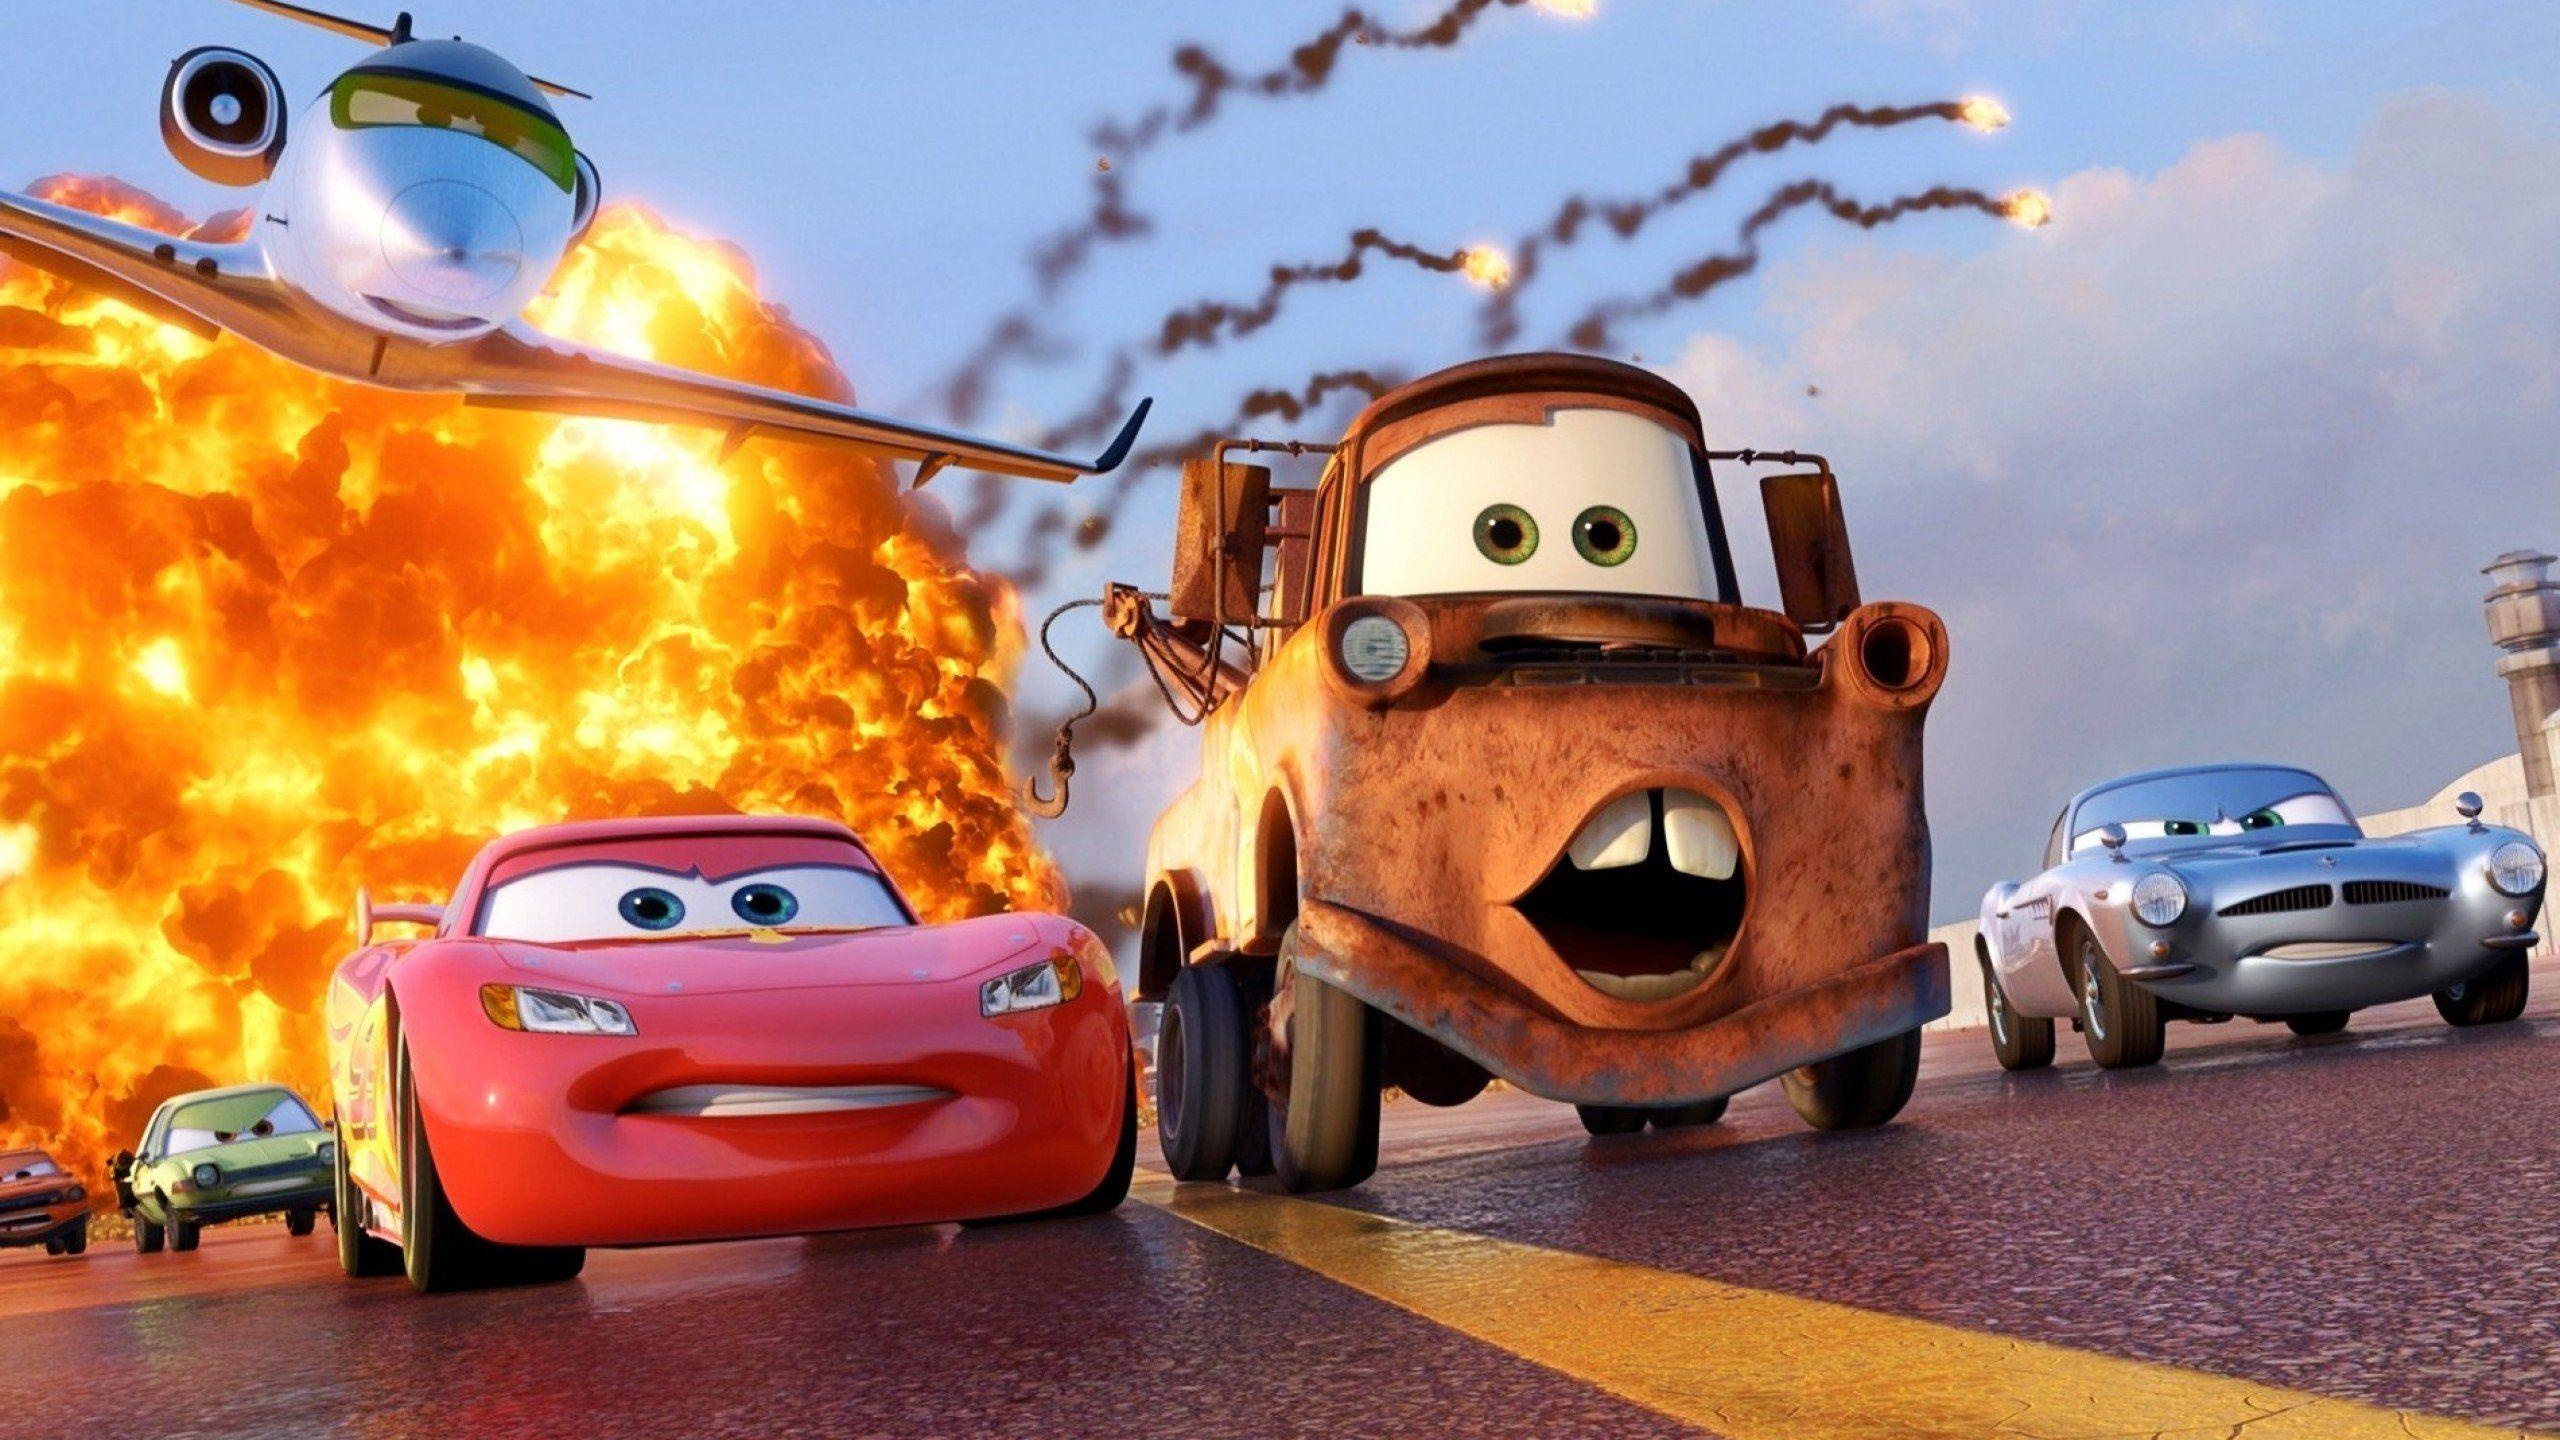 Cars (Disney): The tenth highest-grossing film of 2011, Animation. 2560x1440 HD Background.